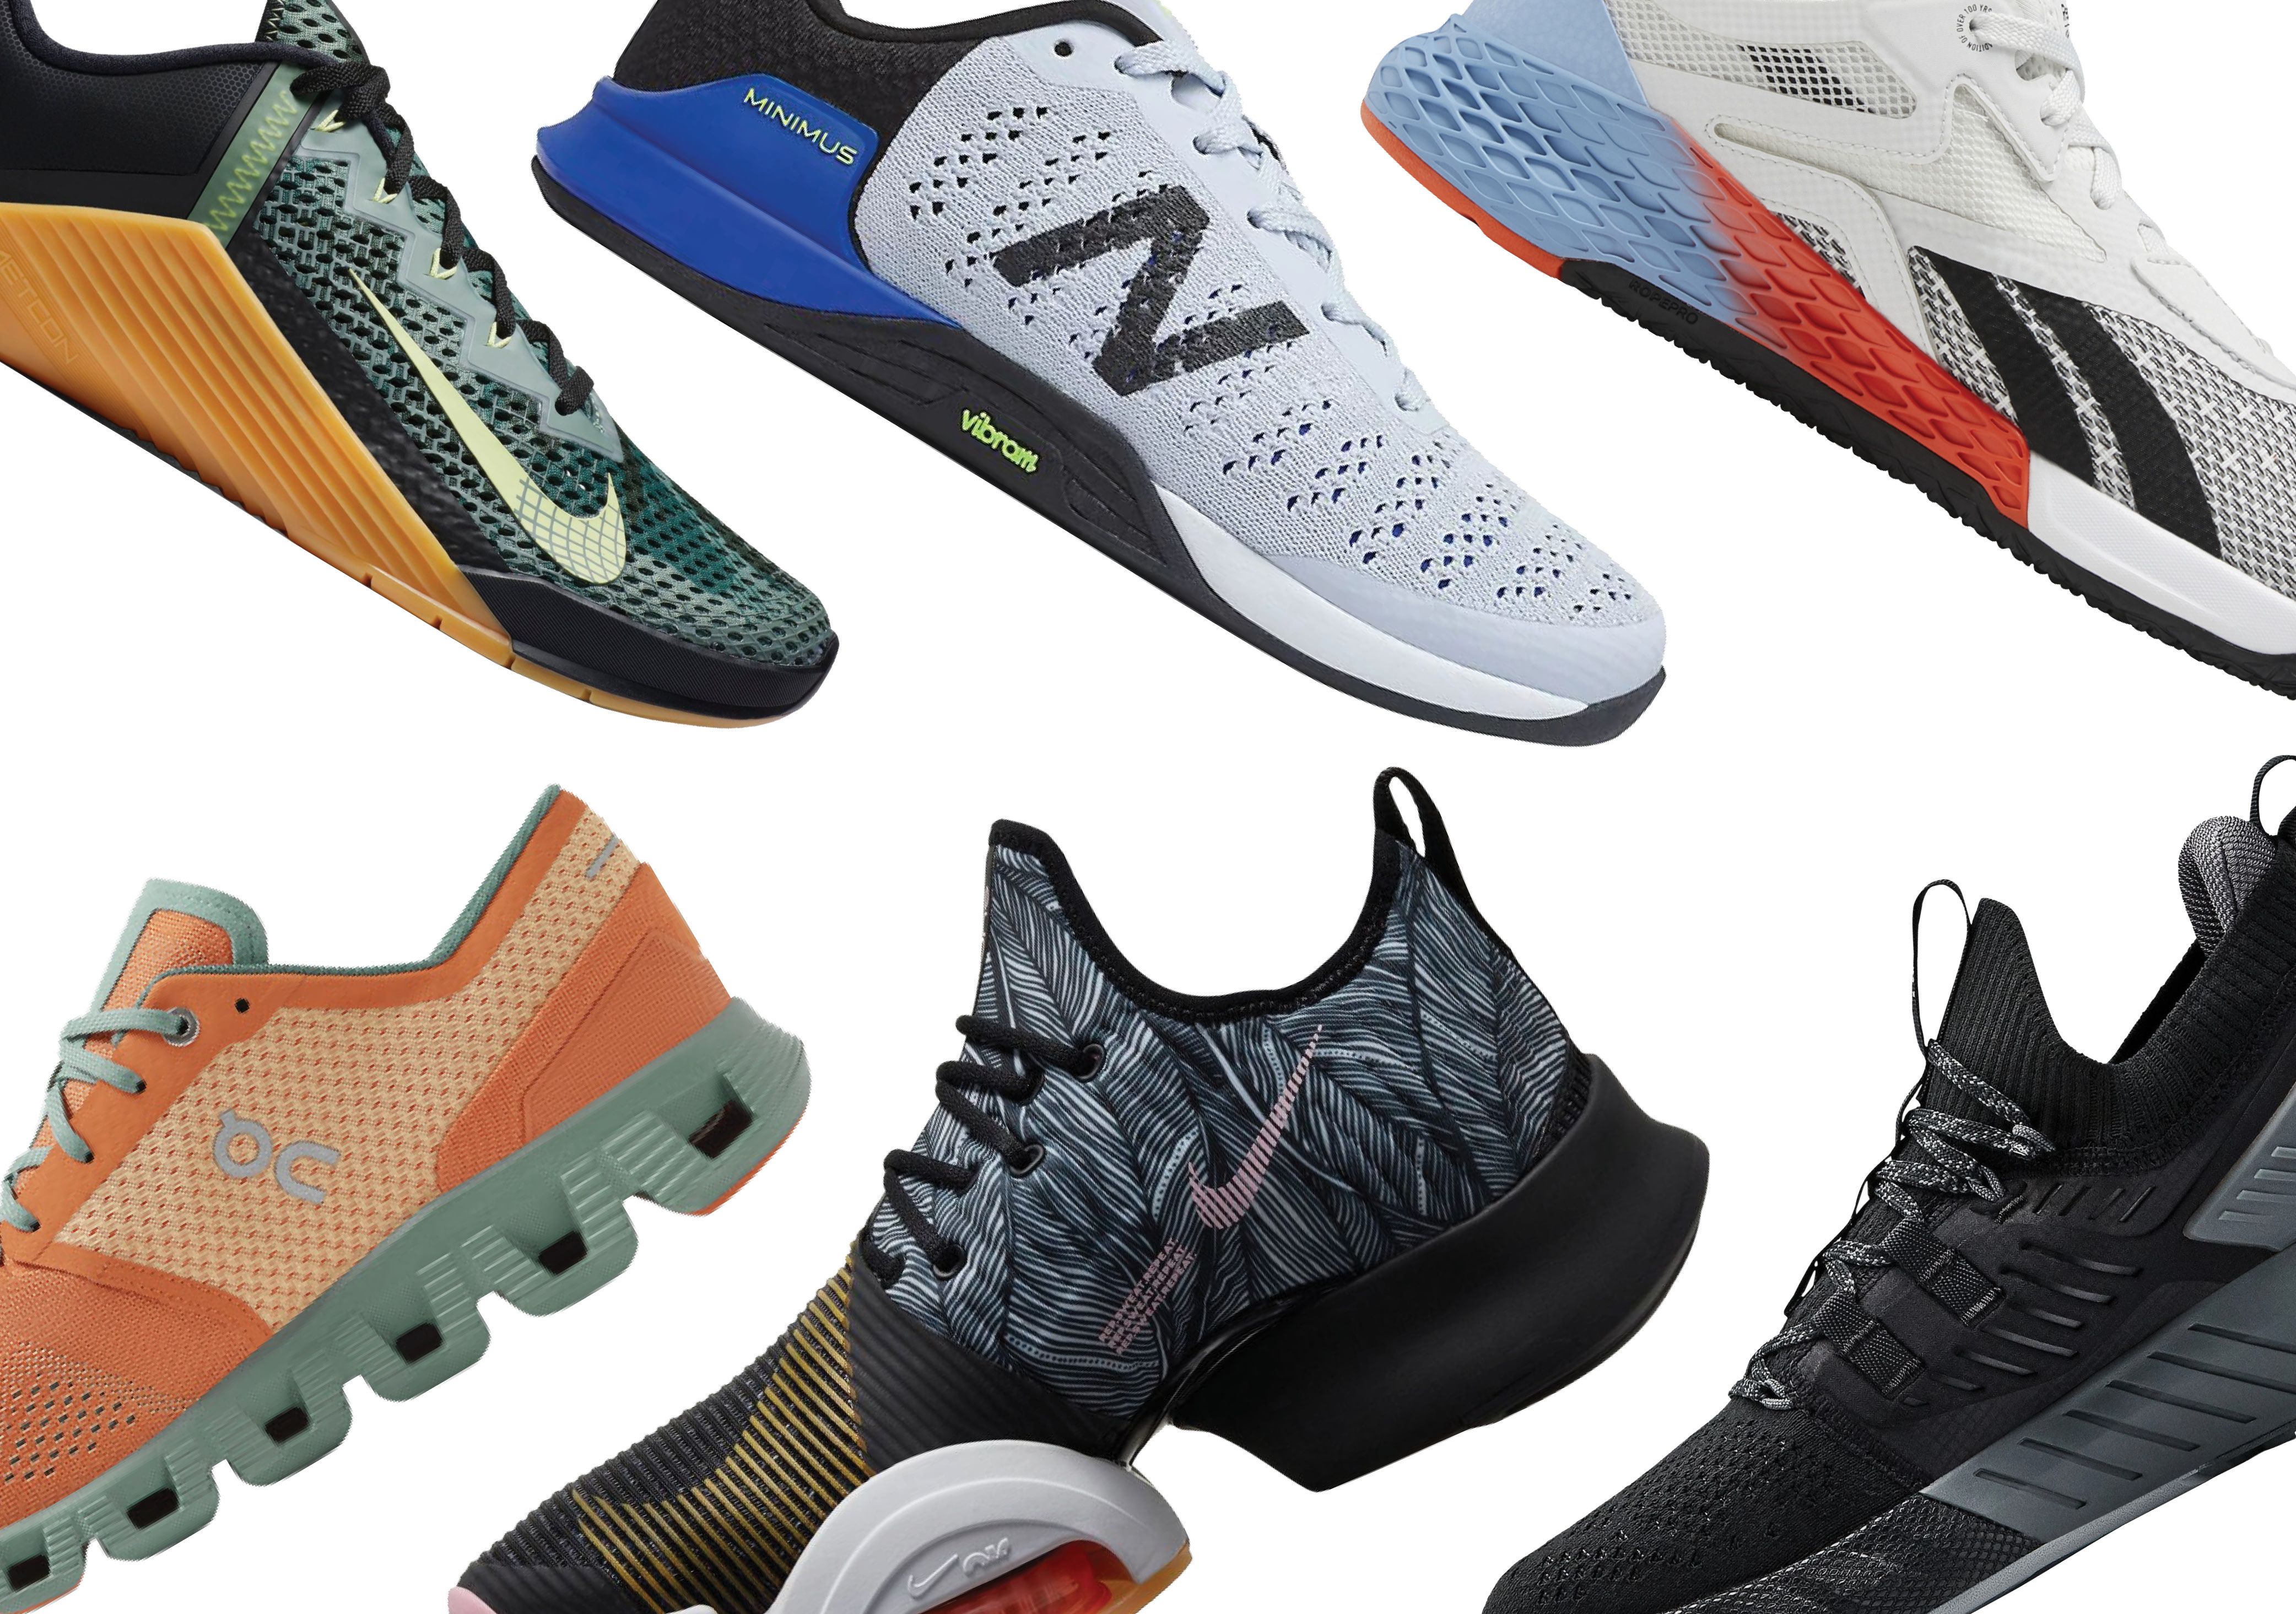 best gym shoes for weightlifting